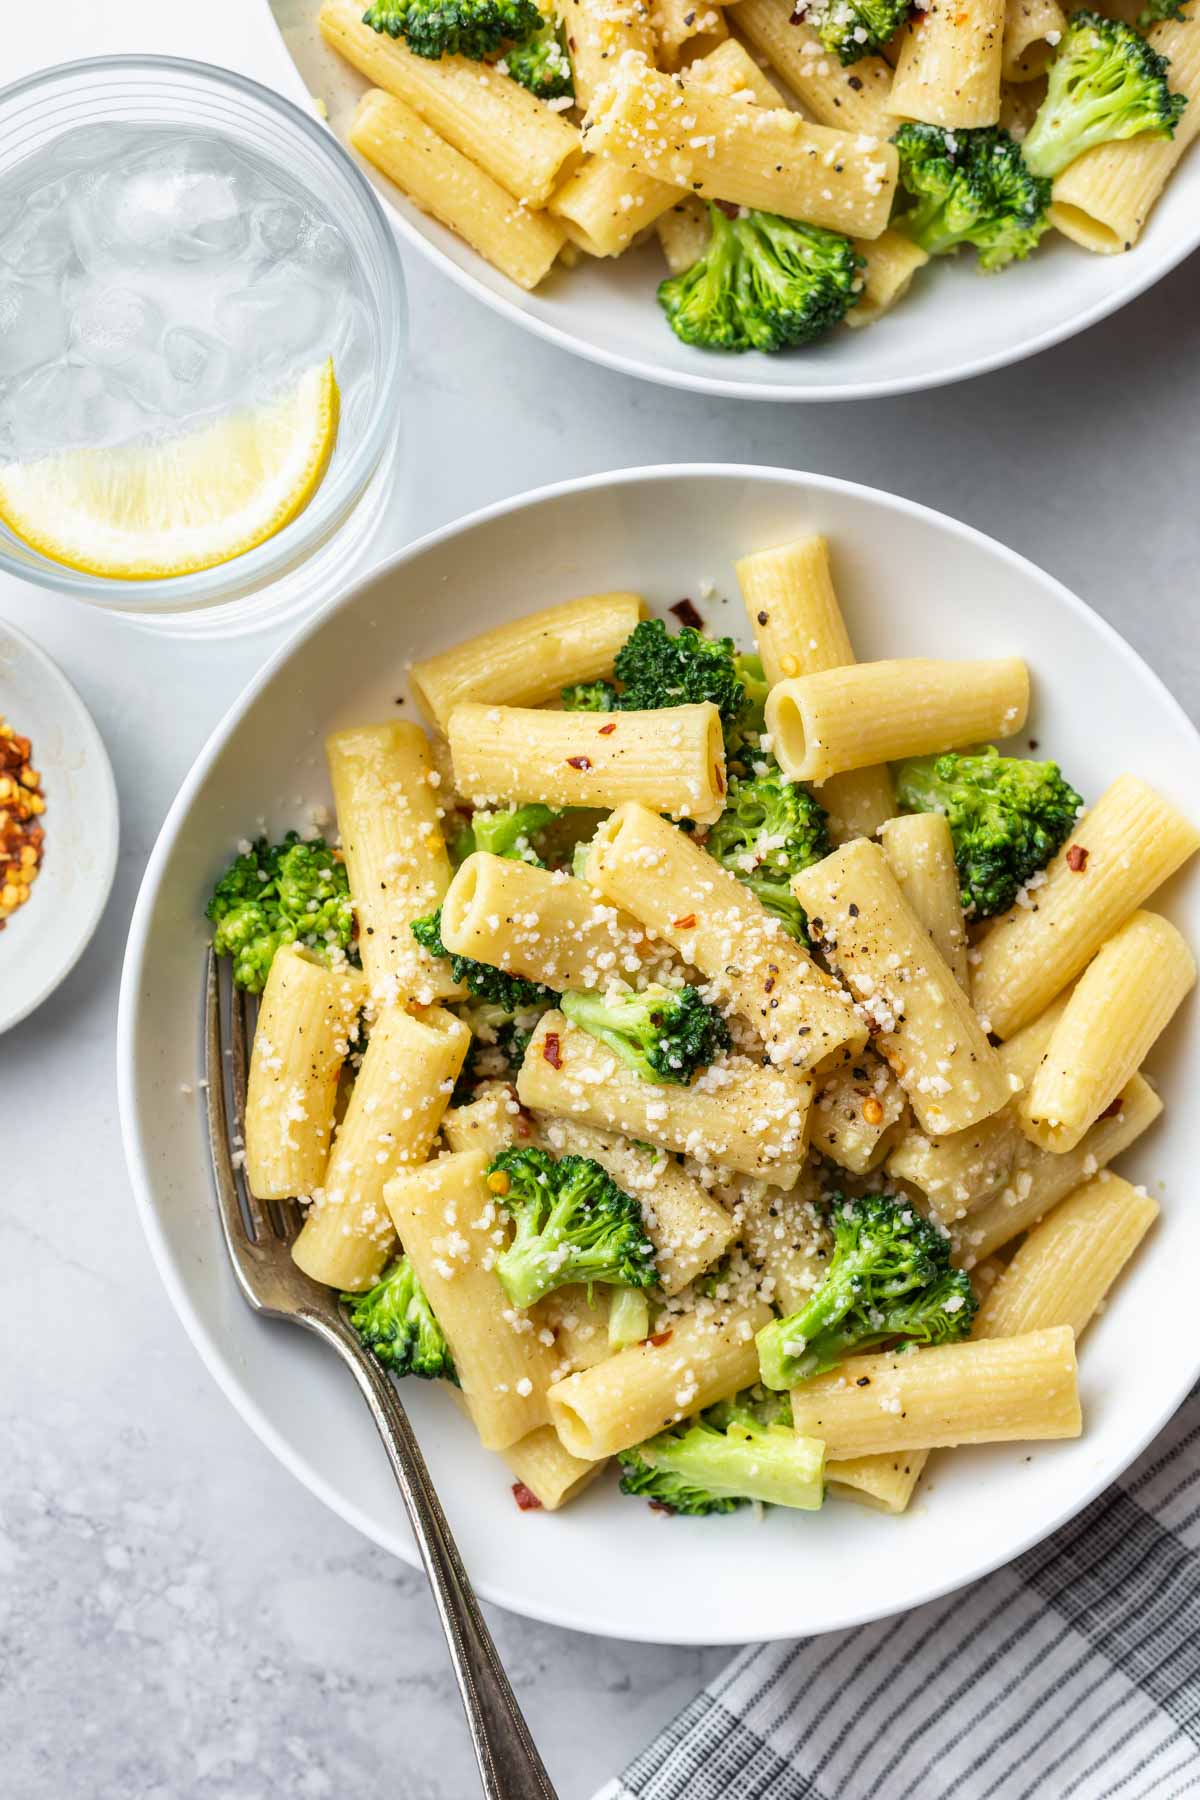 A few simple ingredients turn this easy pasta with broccoli recipe into dairy free weeknight perfection, and it can be ready in under 20 minutes! Make it vegan with a one simple swap.